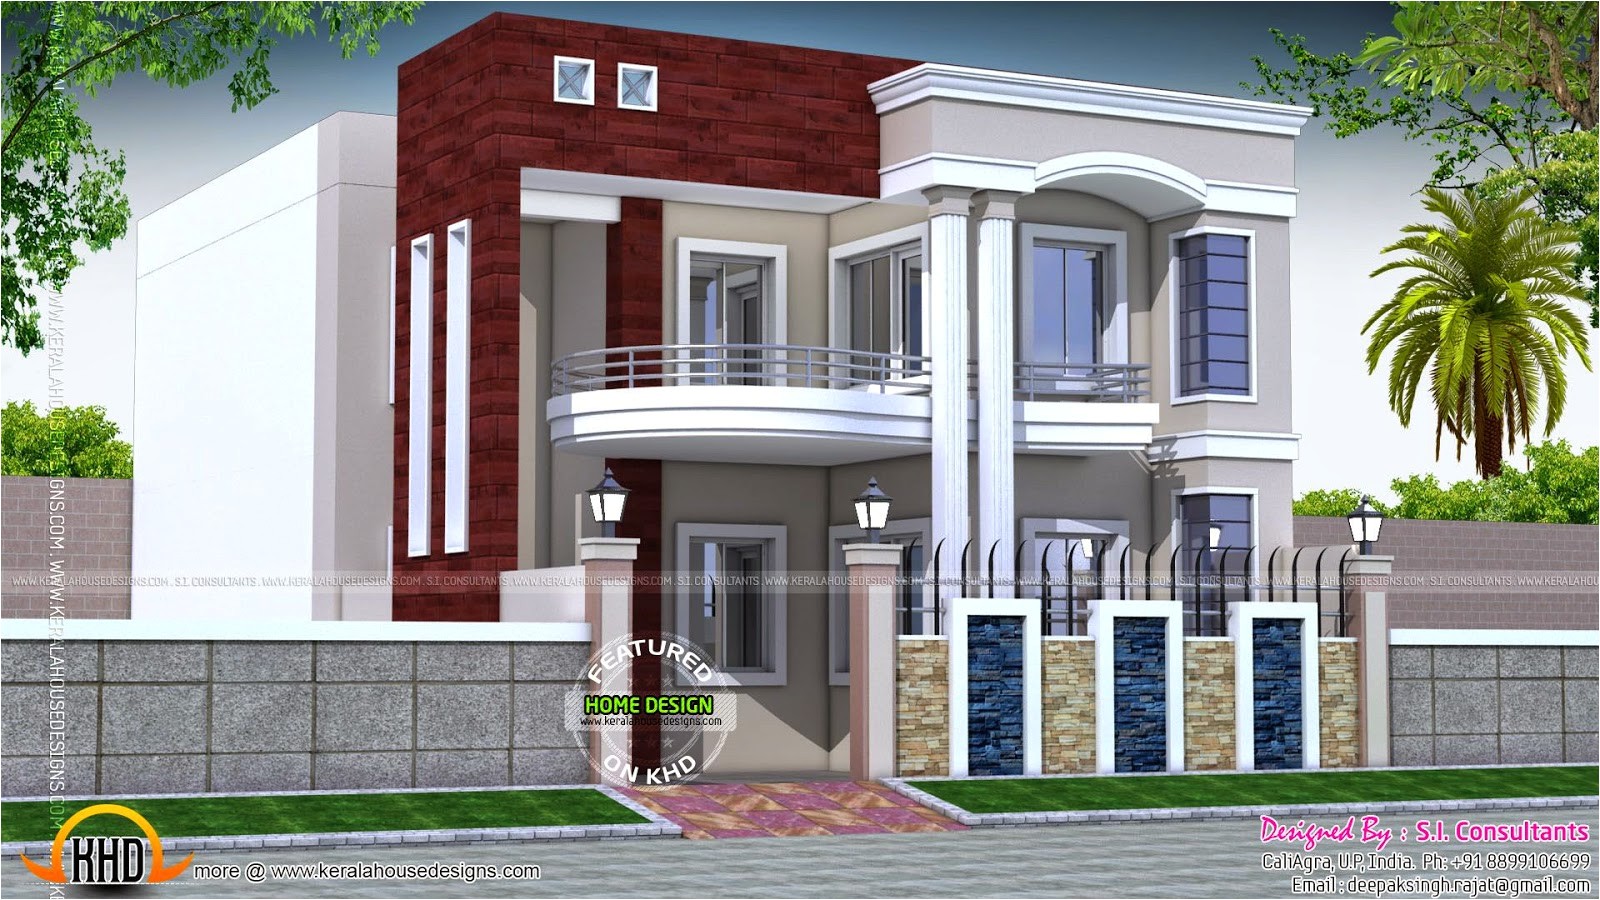 House Designs and Floor Plans In India House Design In north India Kerala Home Design and Floor